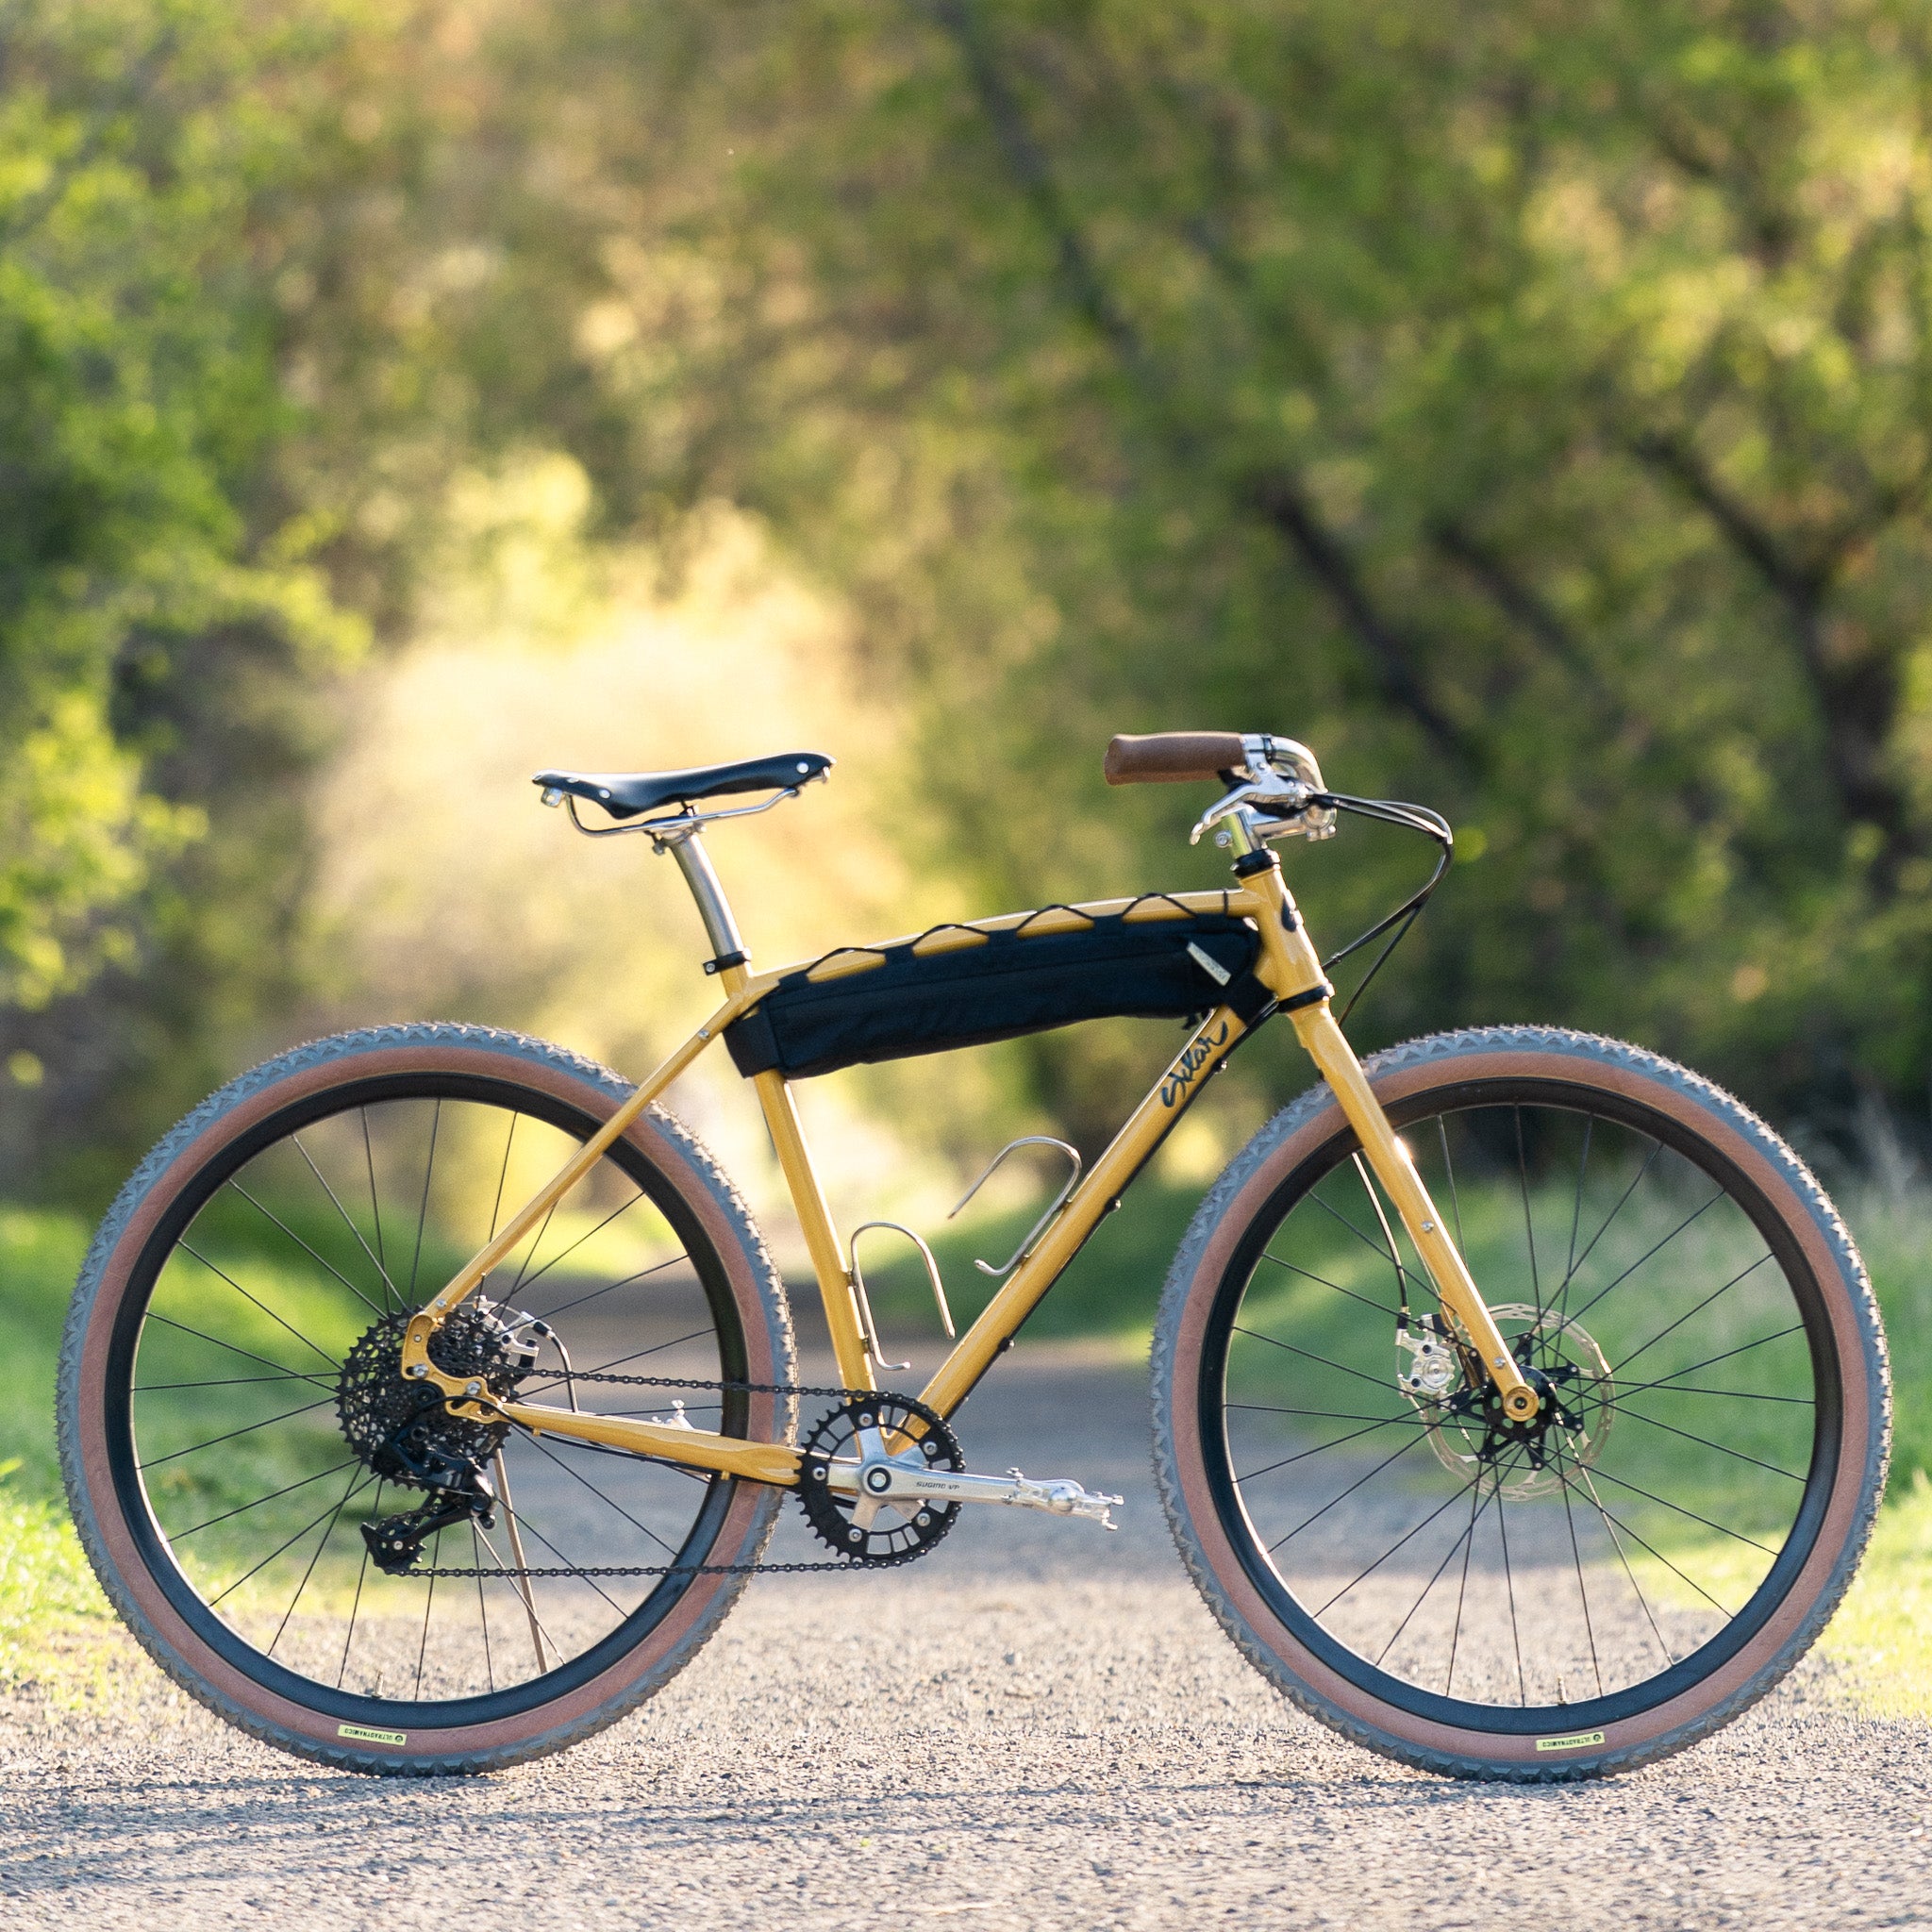 Path Less Pedaled reviews the SuperSomething Gravel Bike